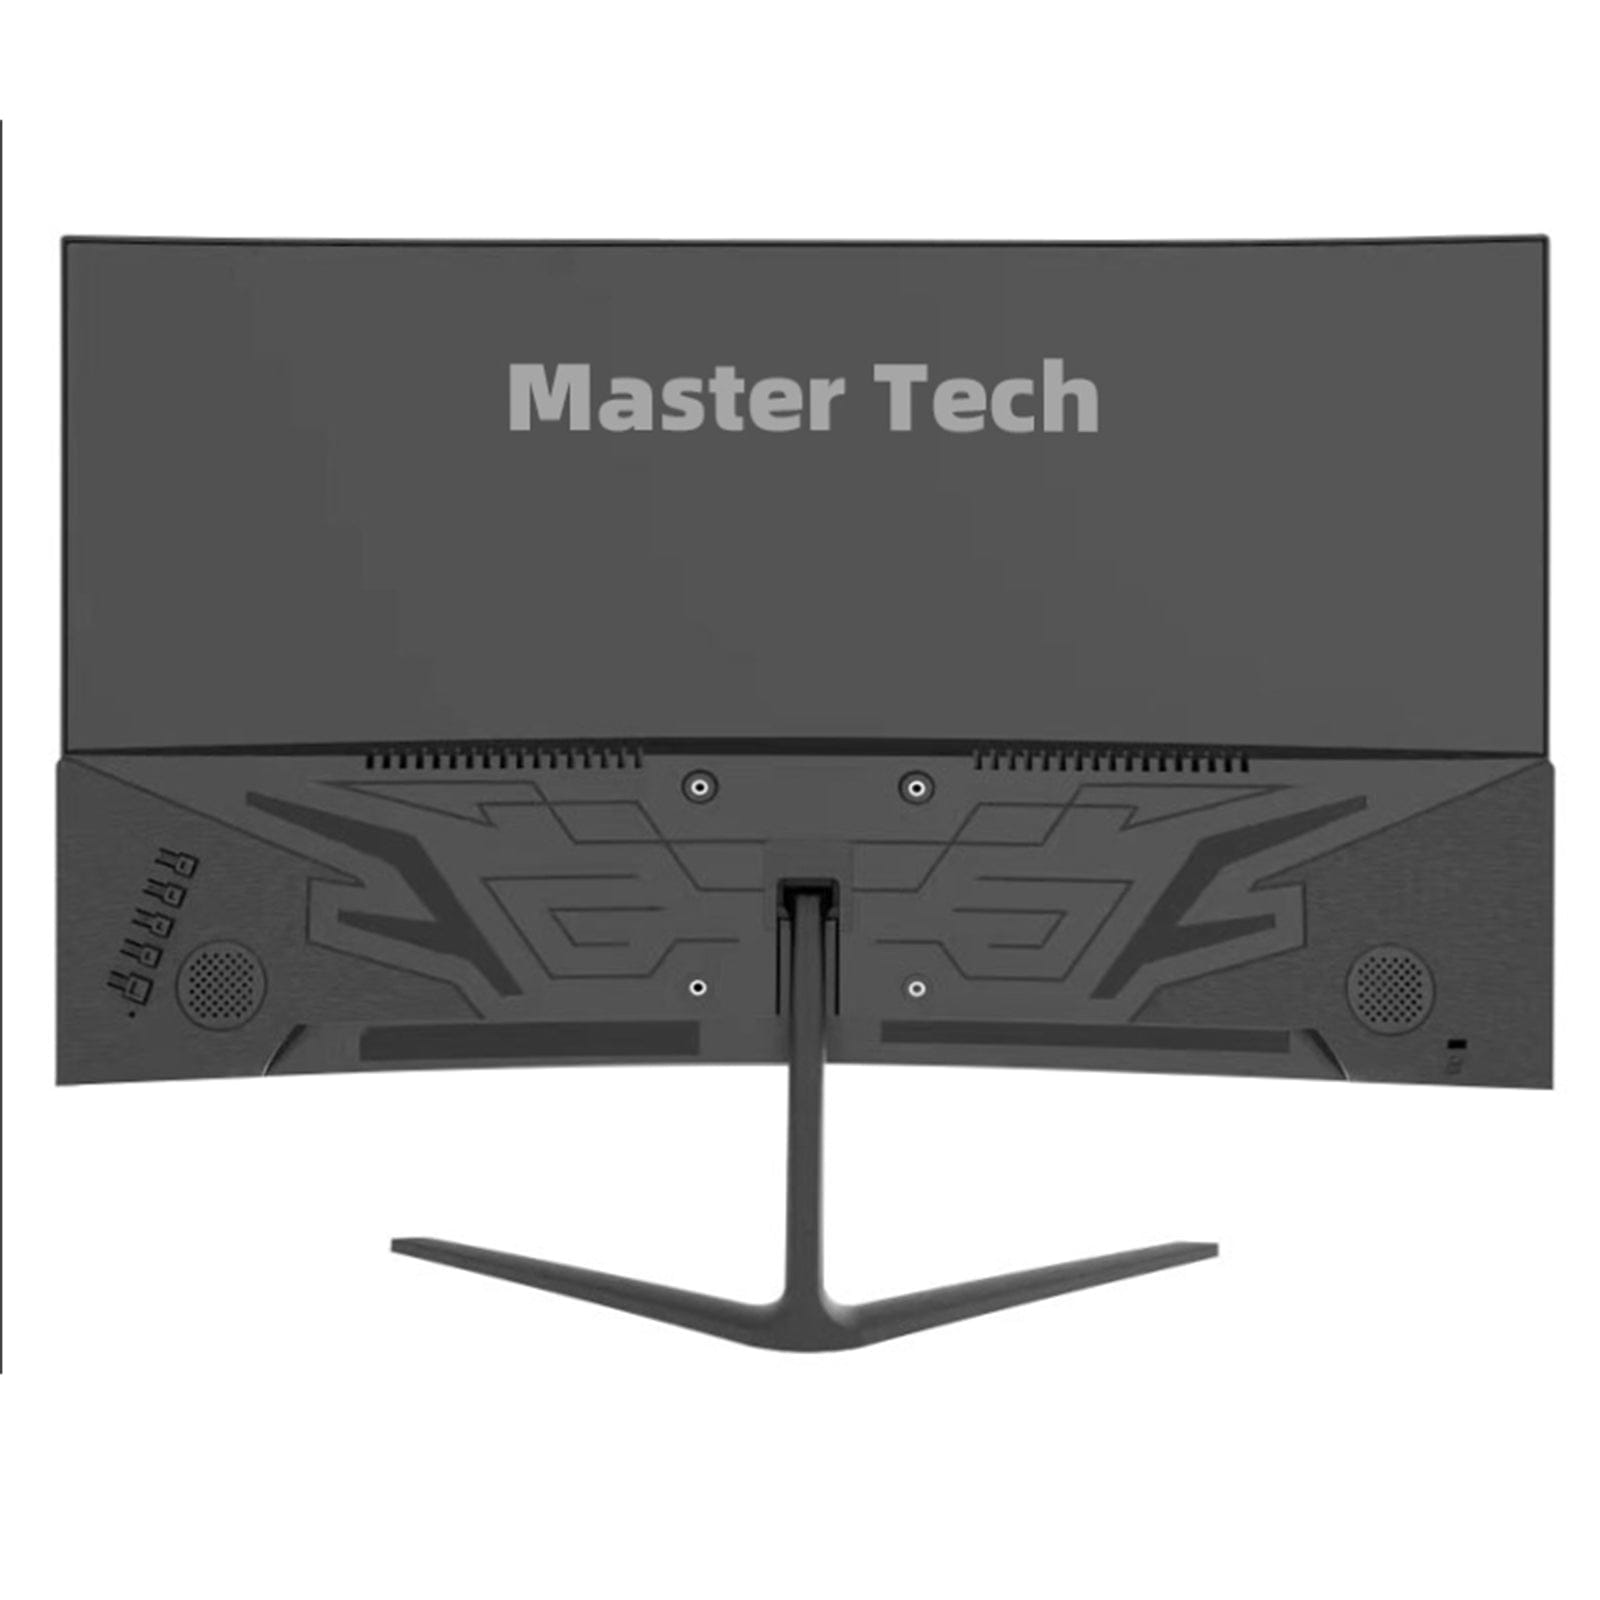 24" Curved LED Panel 1920 x 1080 Refresh Rate 165HZ Monitor Aspect Ratio 16:9